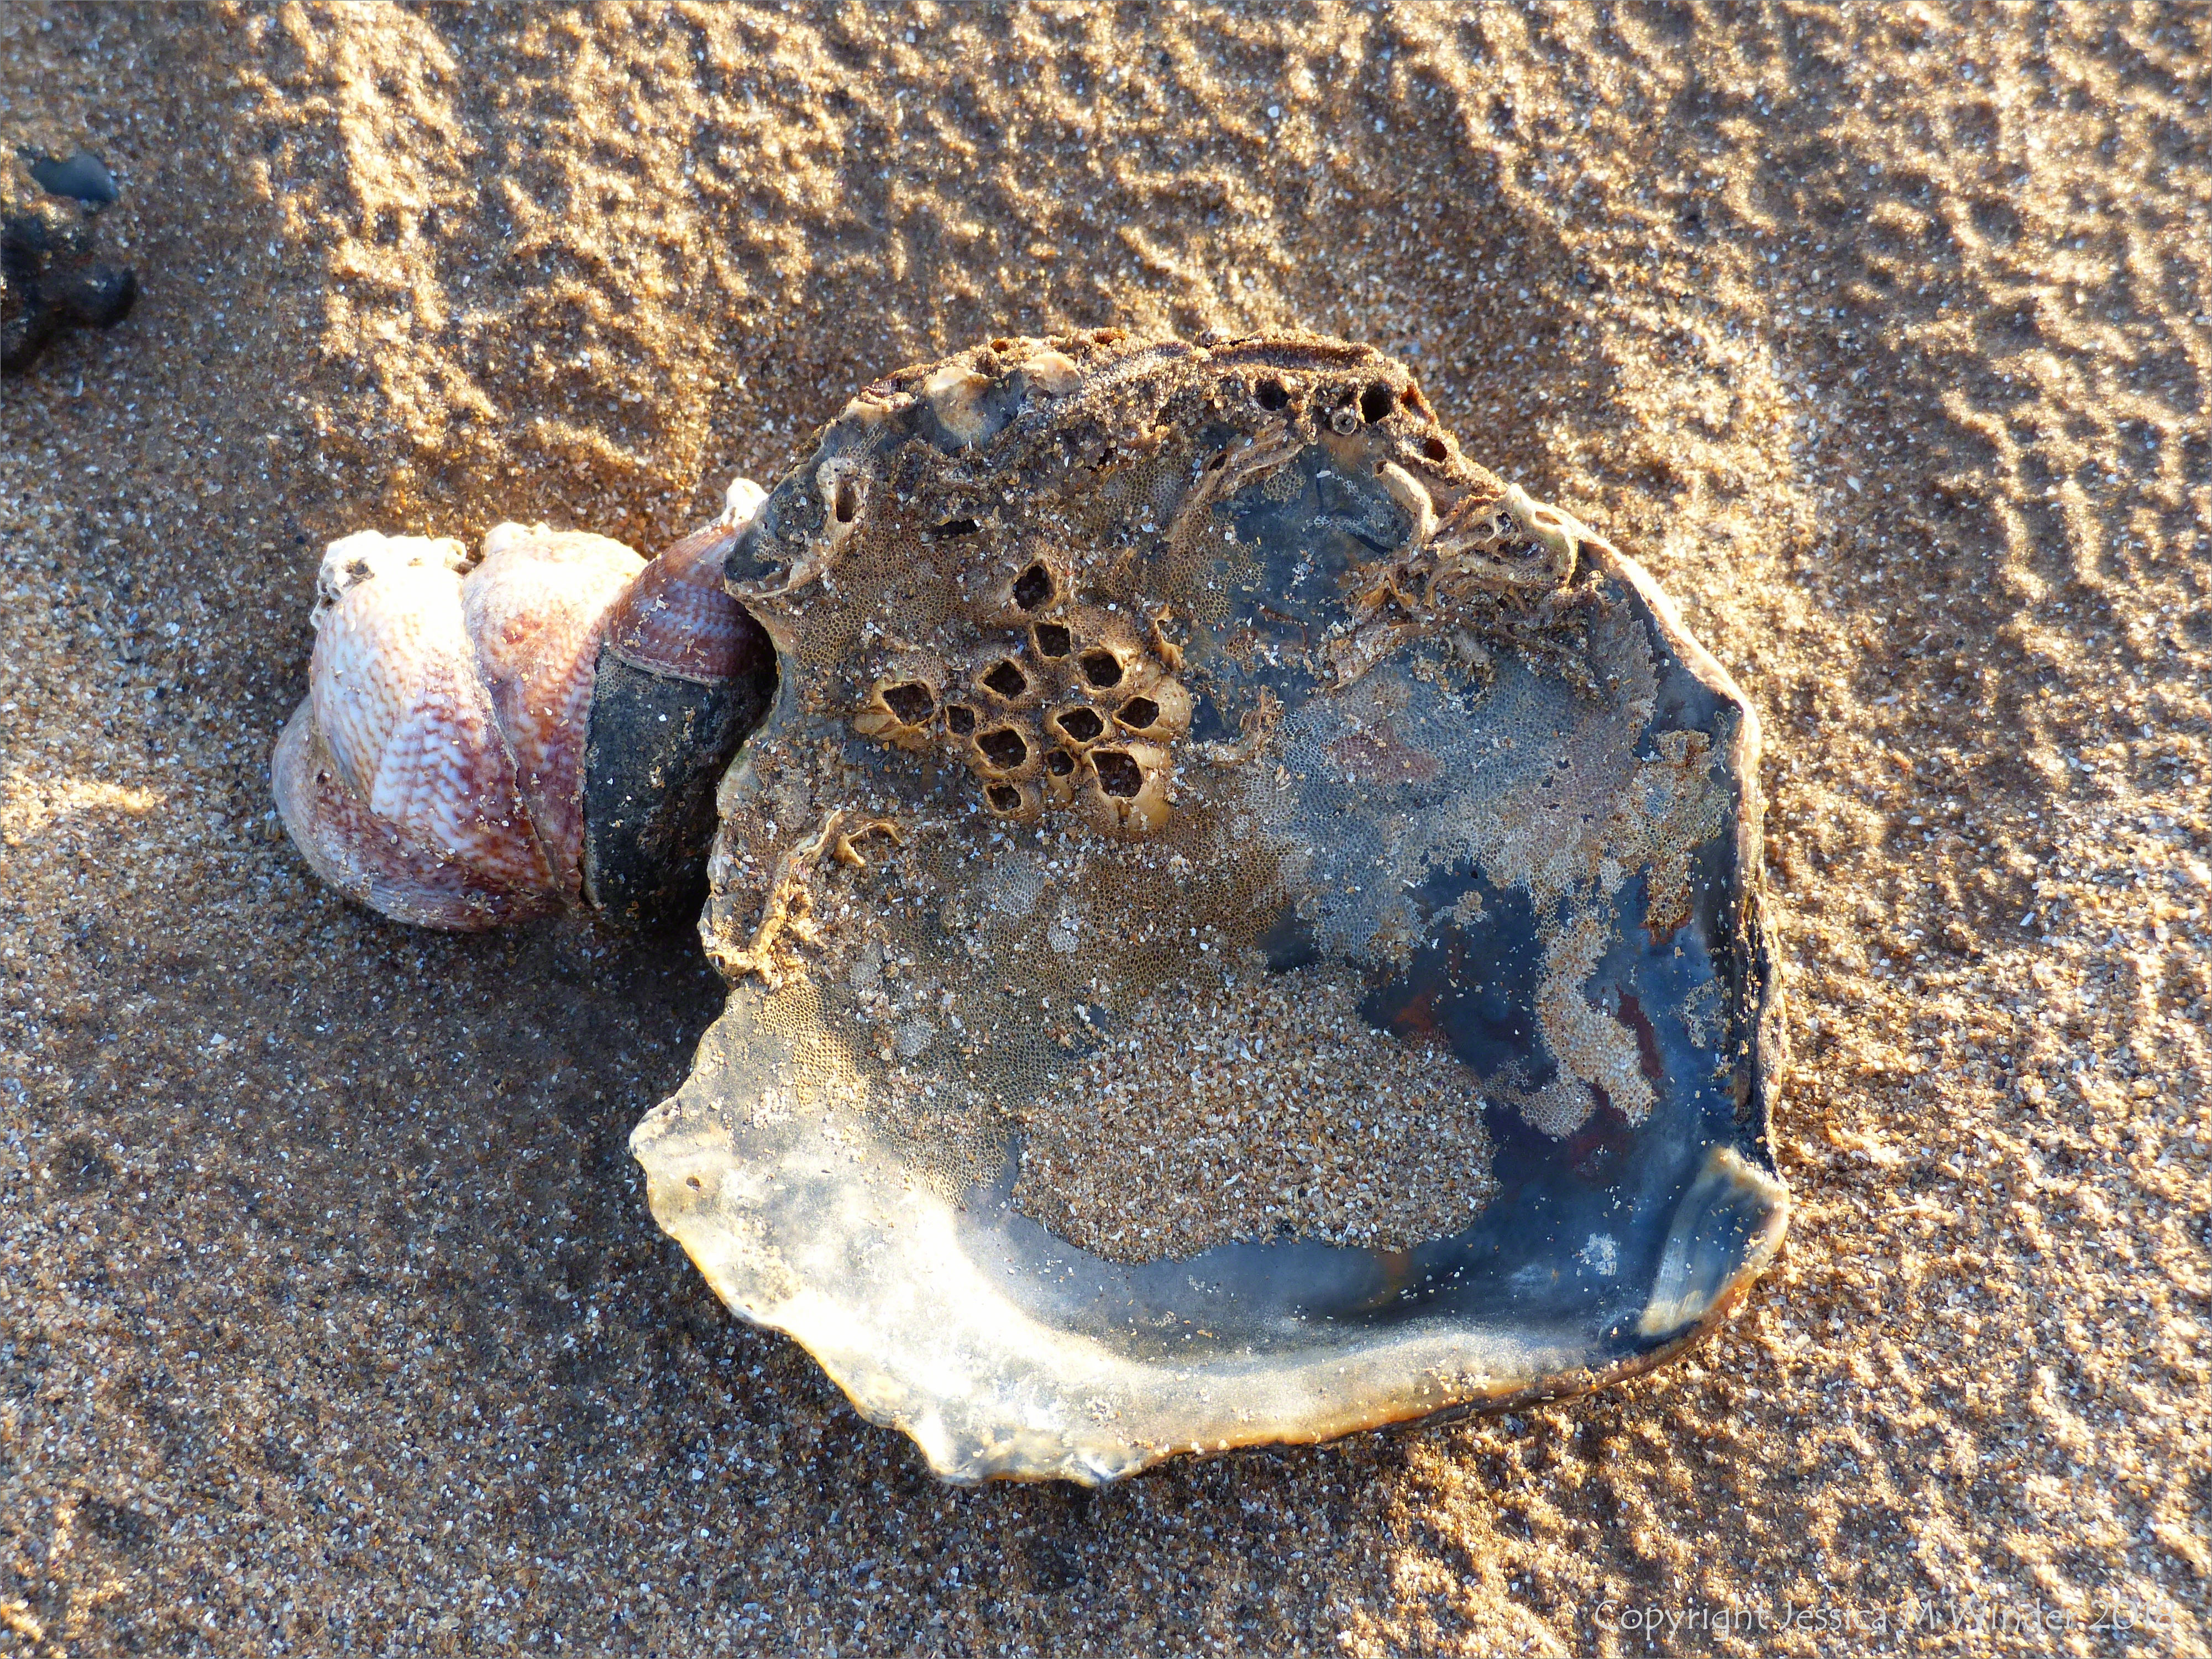 Oyster shell on beach with slipper limpets